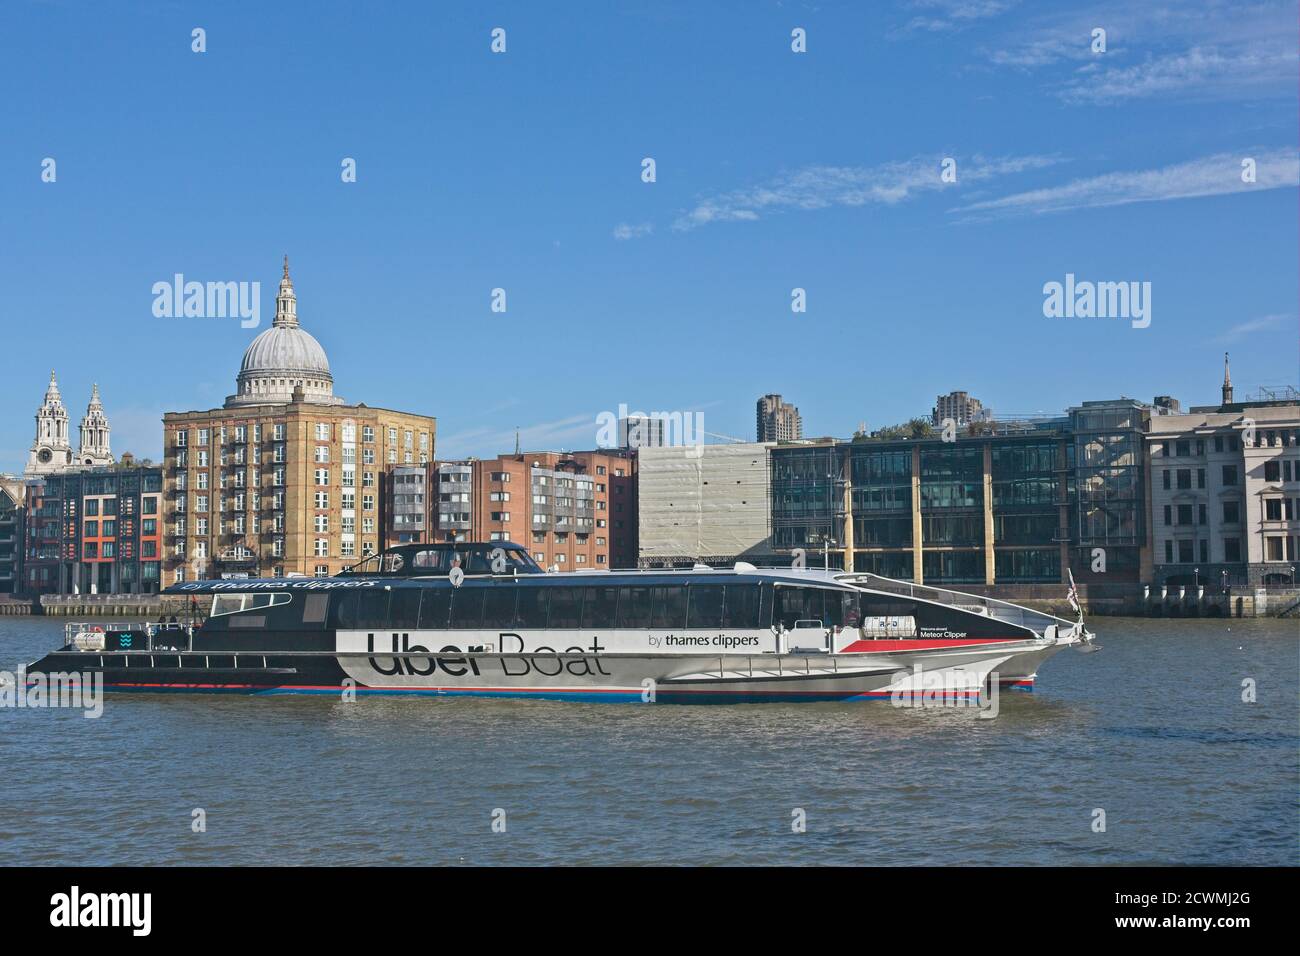 Thames river boat with Uber branding opposite St Paul's Cathedral in central London Stock Photo